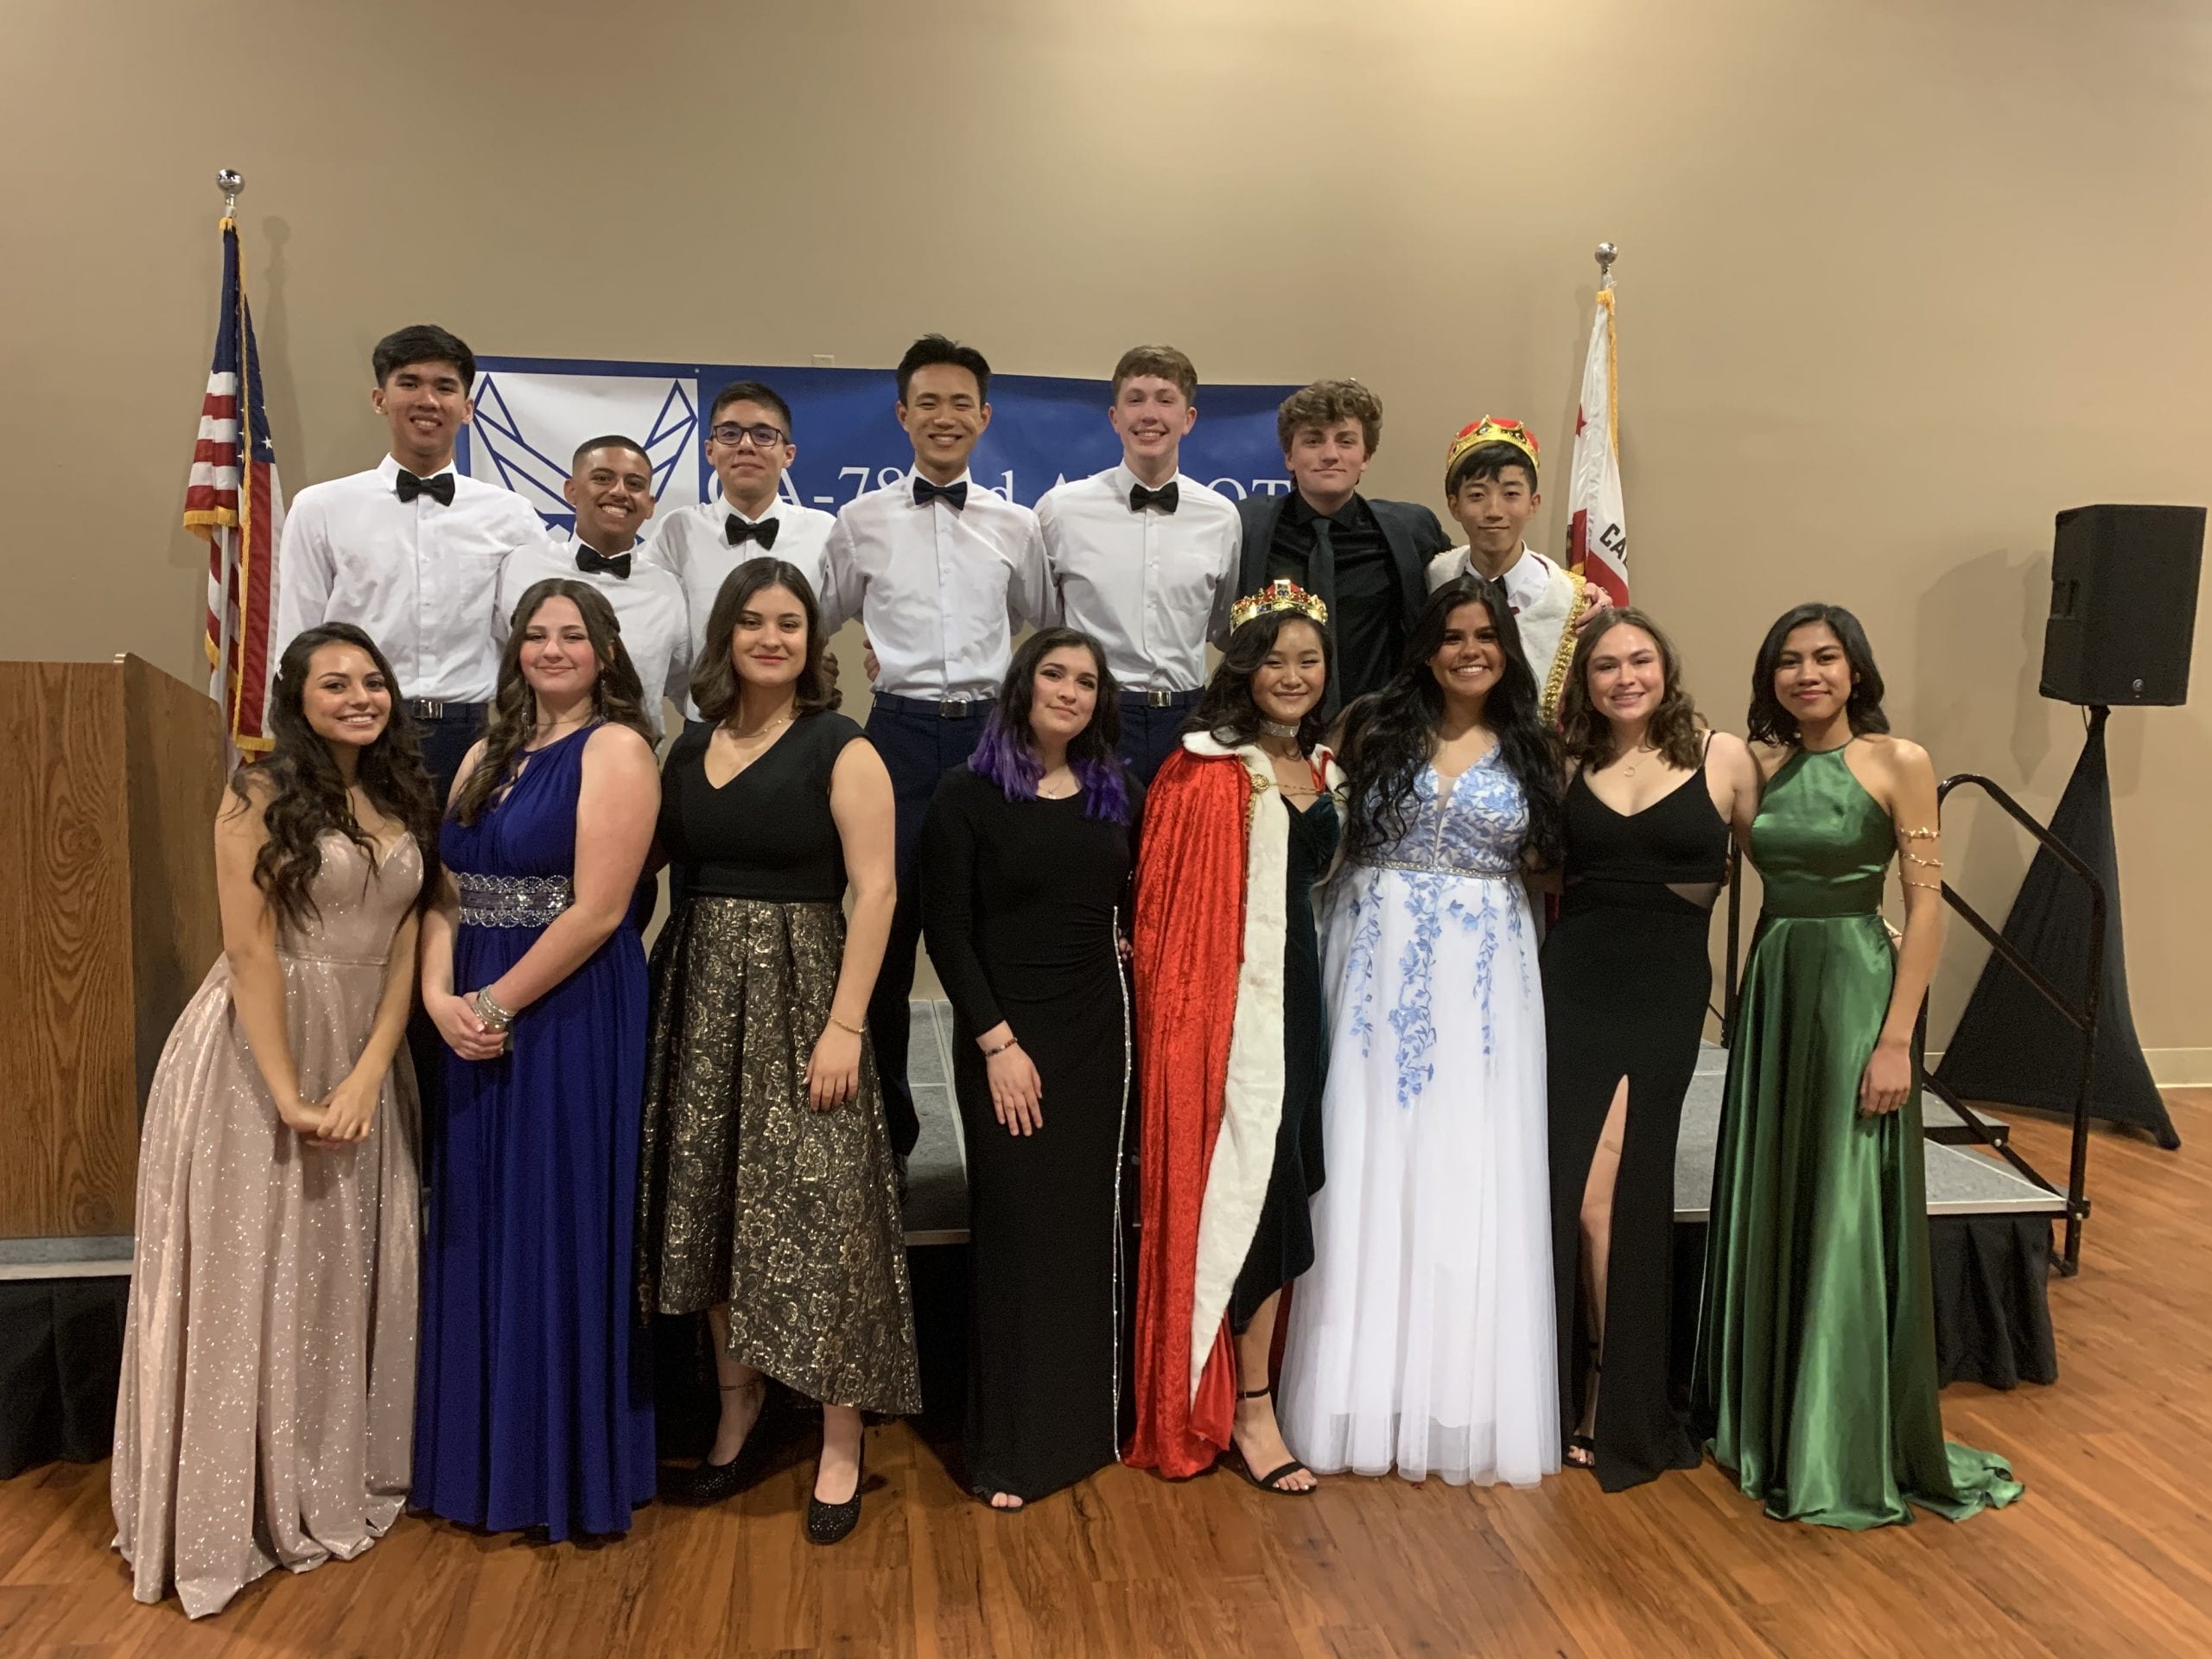 CA782nd Air Force JROTC Gathers for Annual Military Ball